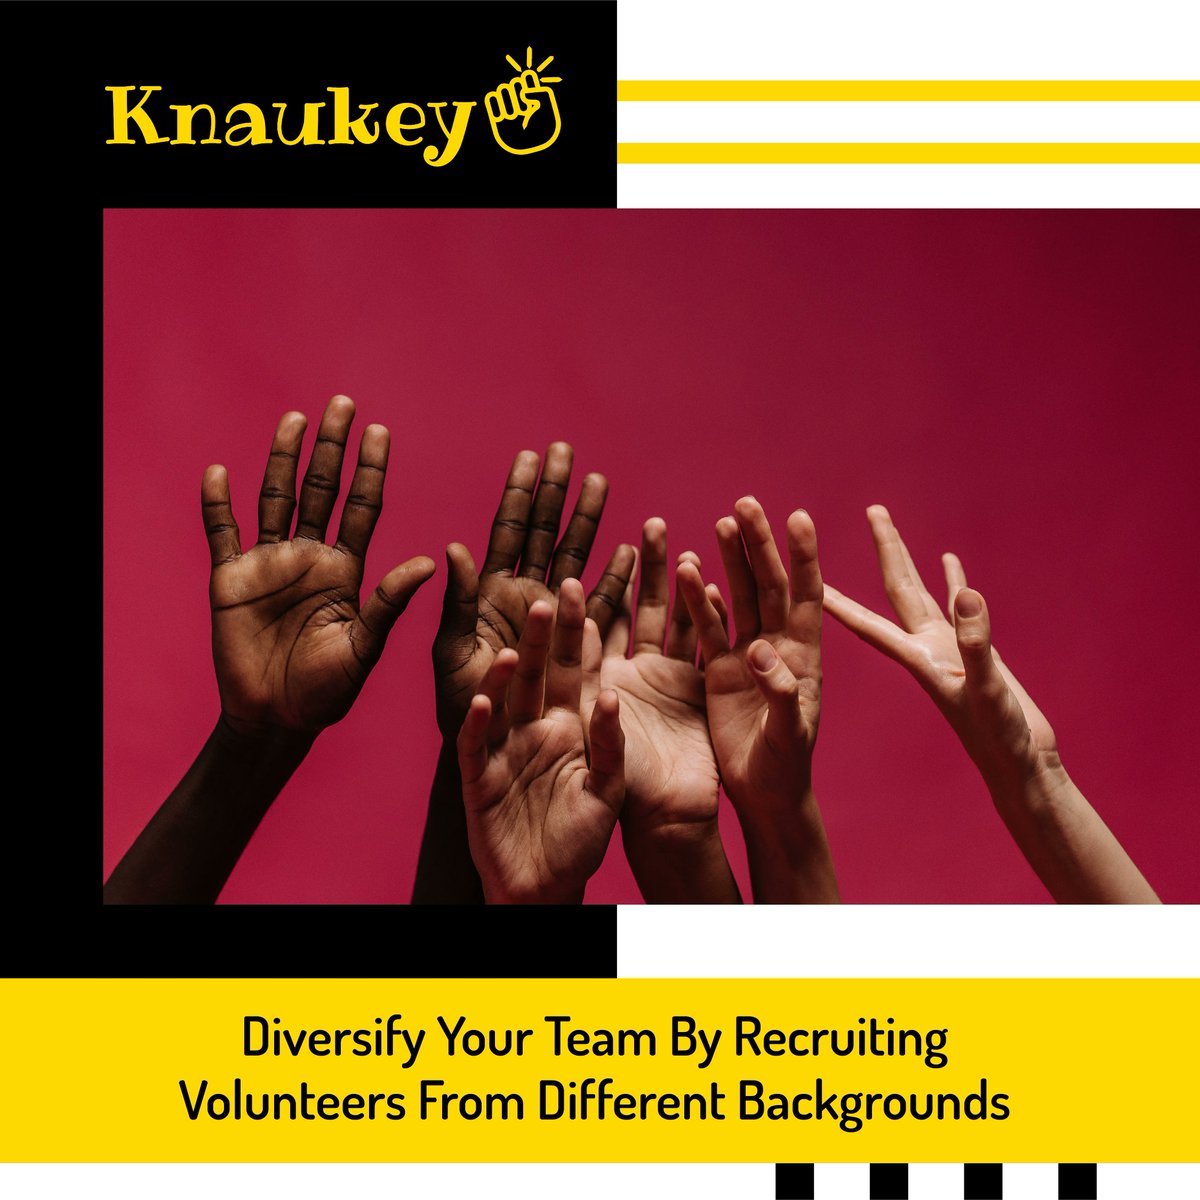 Transform your charity networking events with Knaukey’s event calendar, social content sharing, and remote volunteer hunt features!
#fundraising #charitydonors #volunteerrecruitment